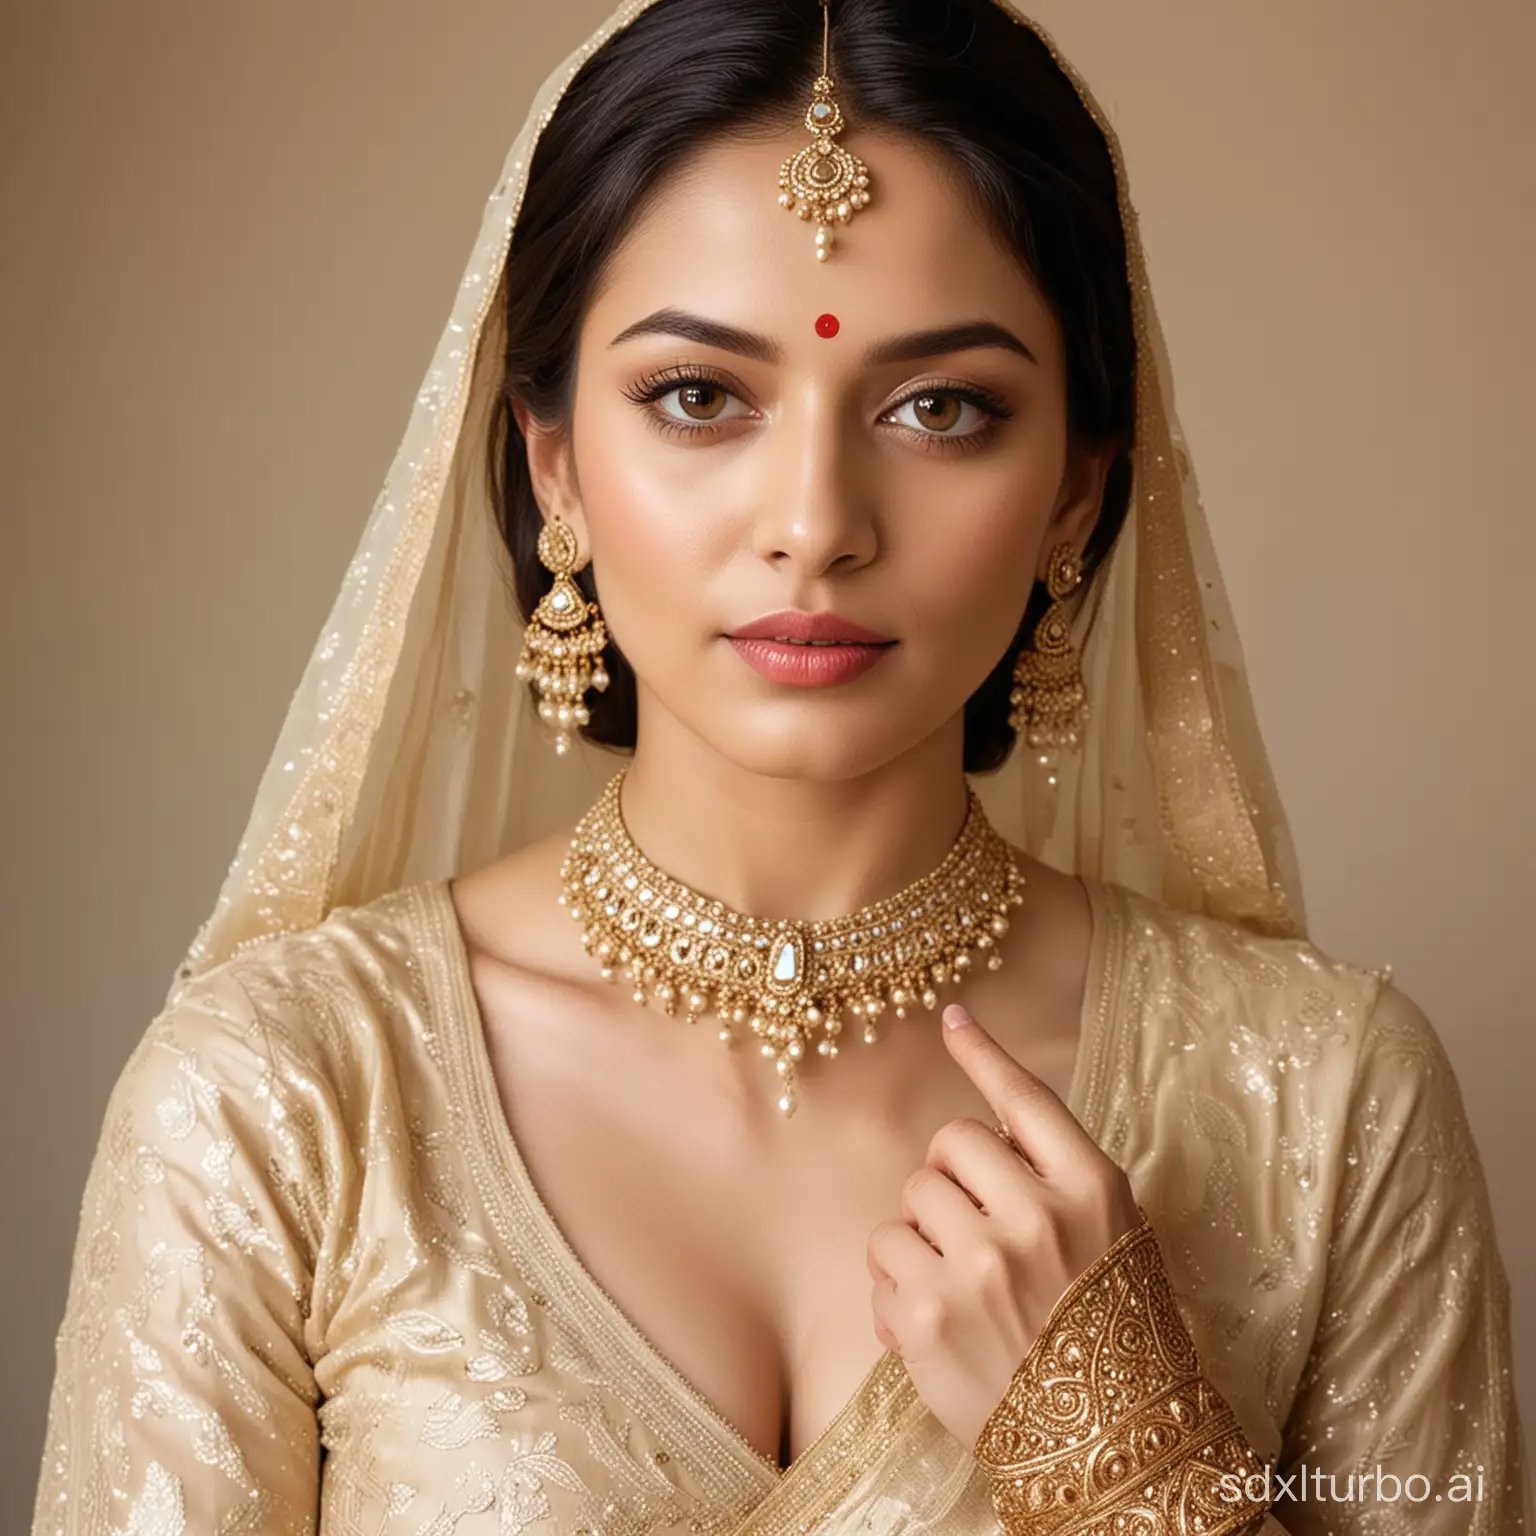 indian lady with pale skin getting ready for a party wearing luxurious embodied natural colour traditional expensive clothing